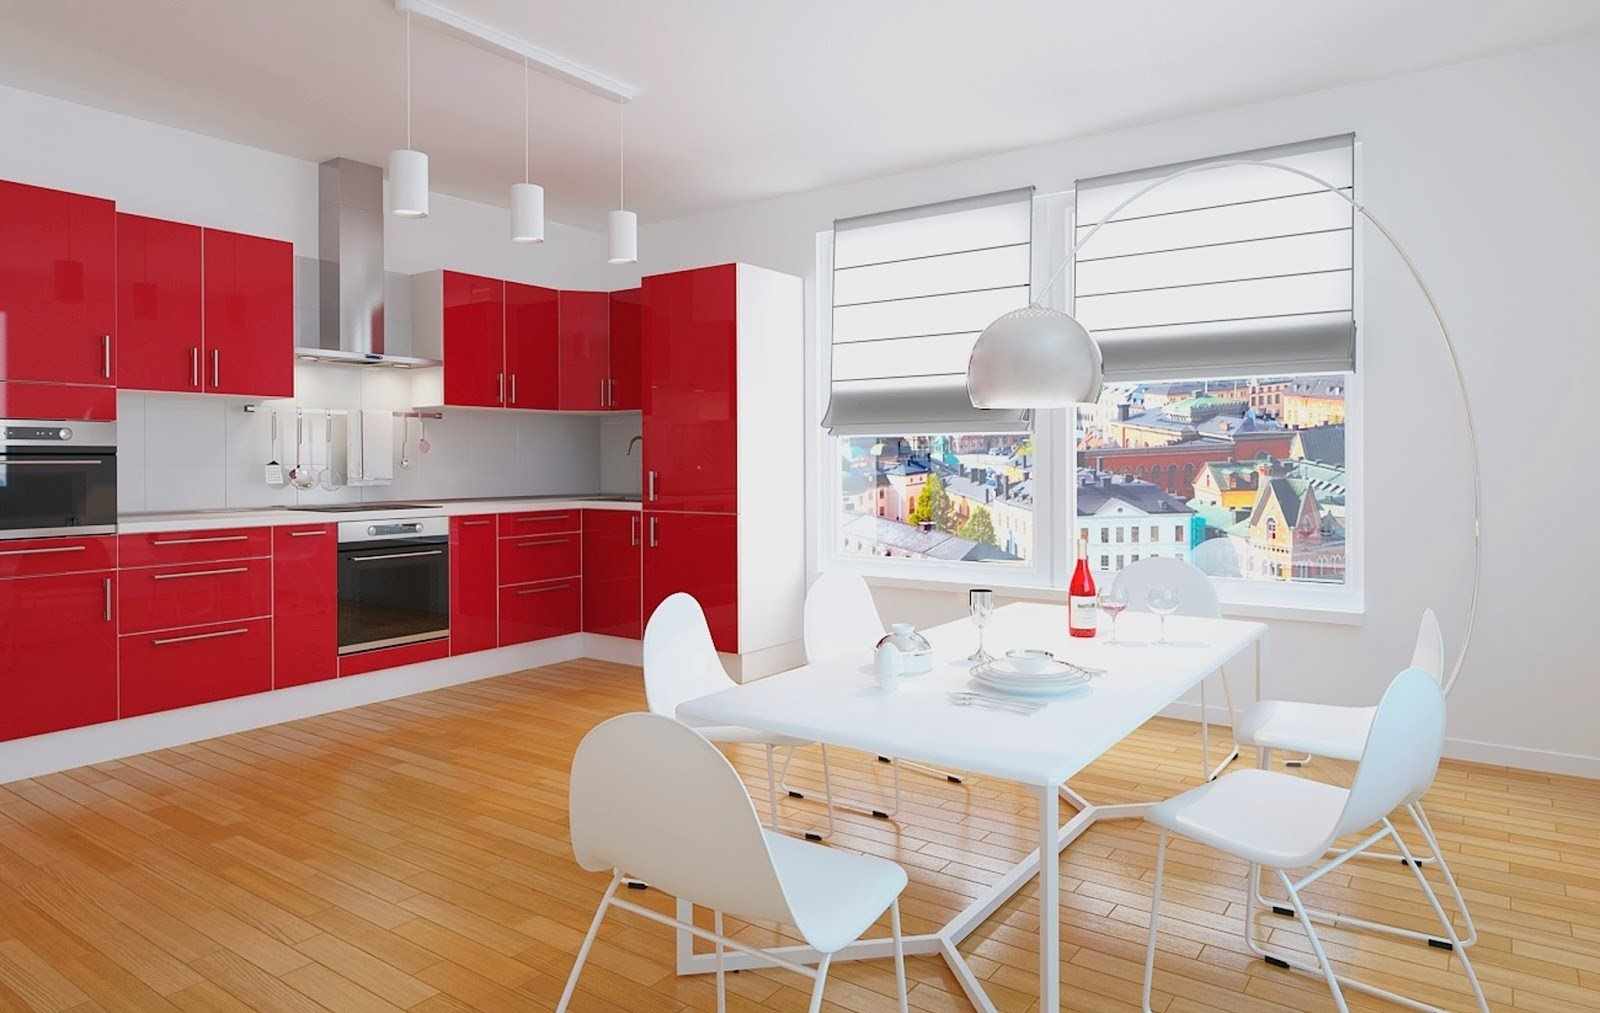 bright design variant of the red kitchen